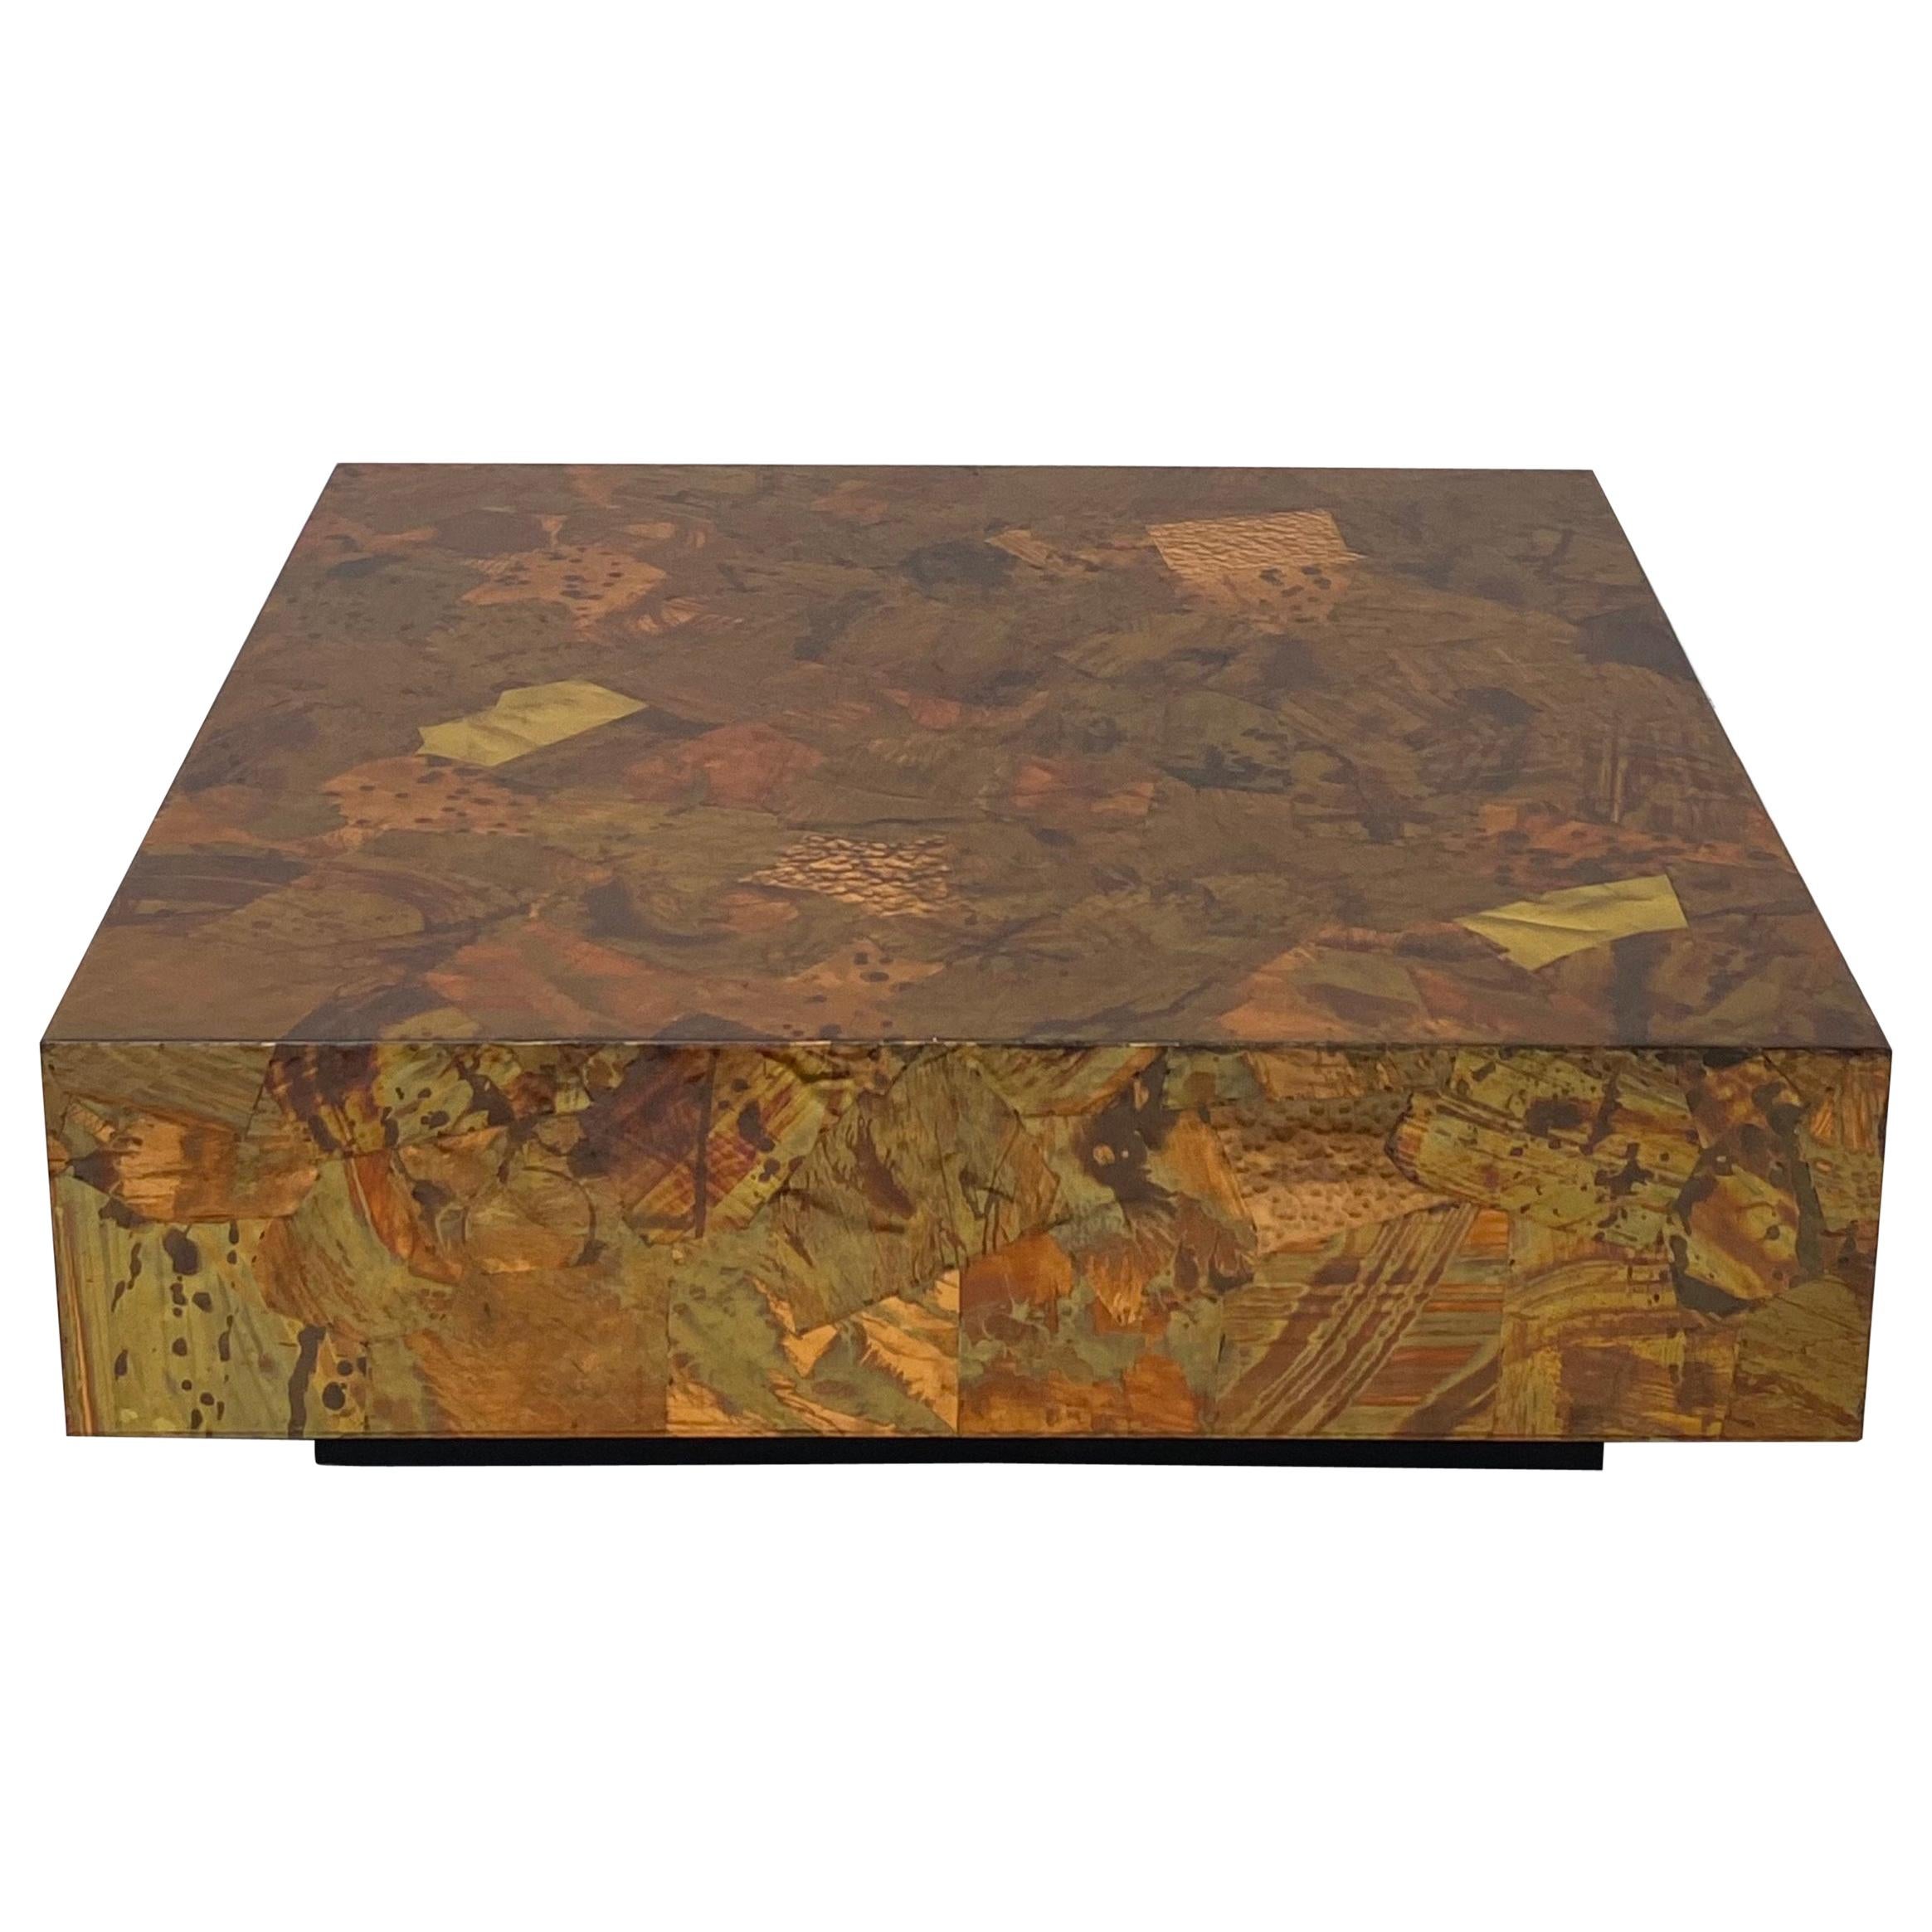 Mid-Century Modern Patchwork Copper and Brass Coffee Table for Modernage